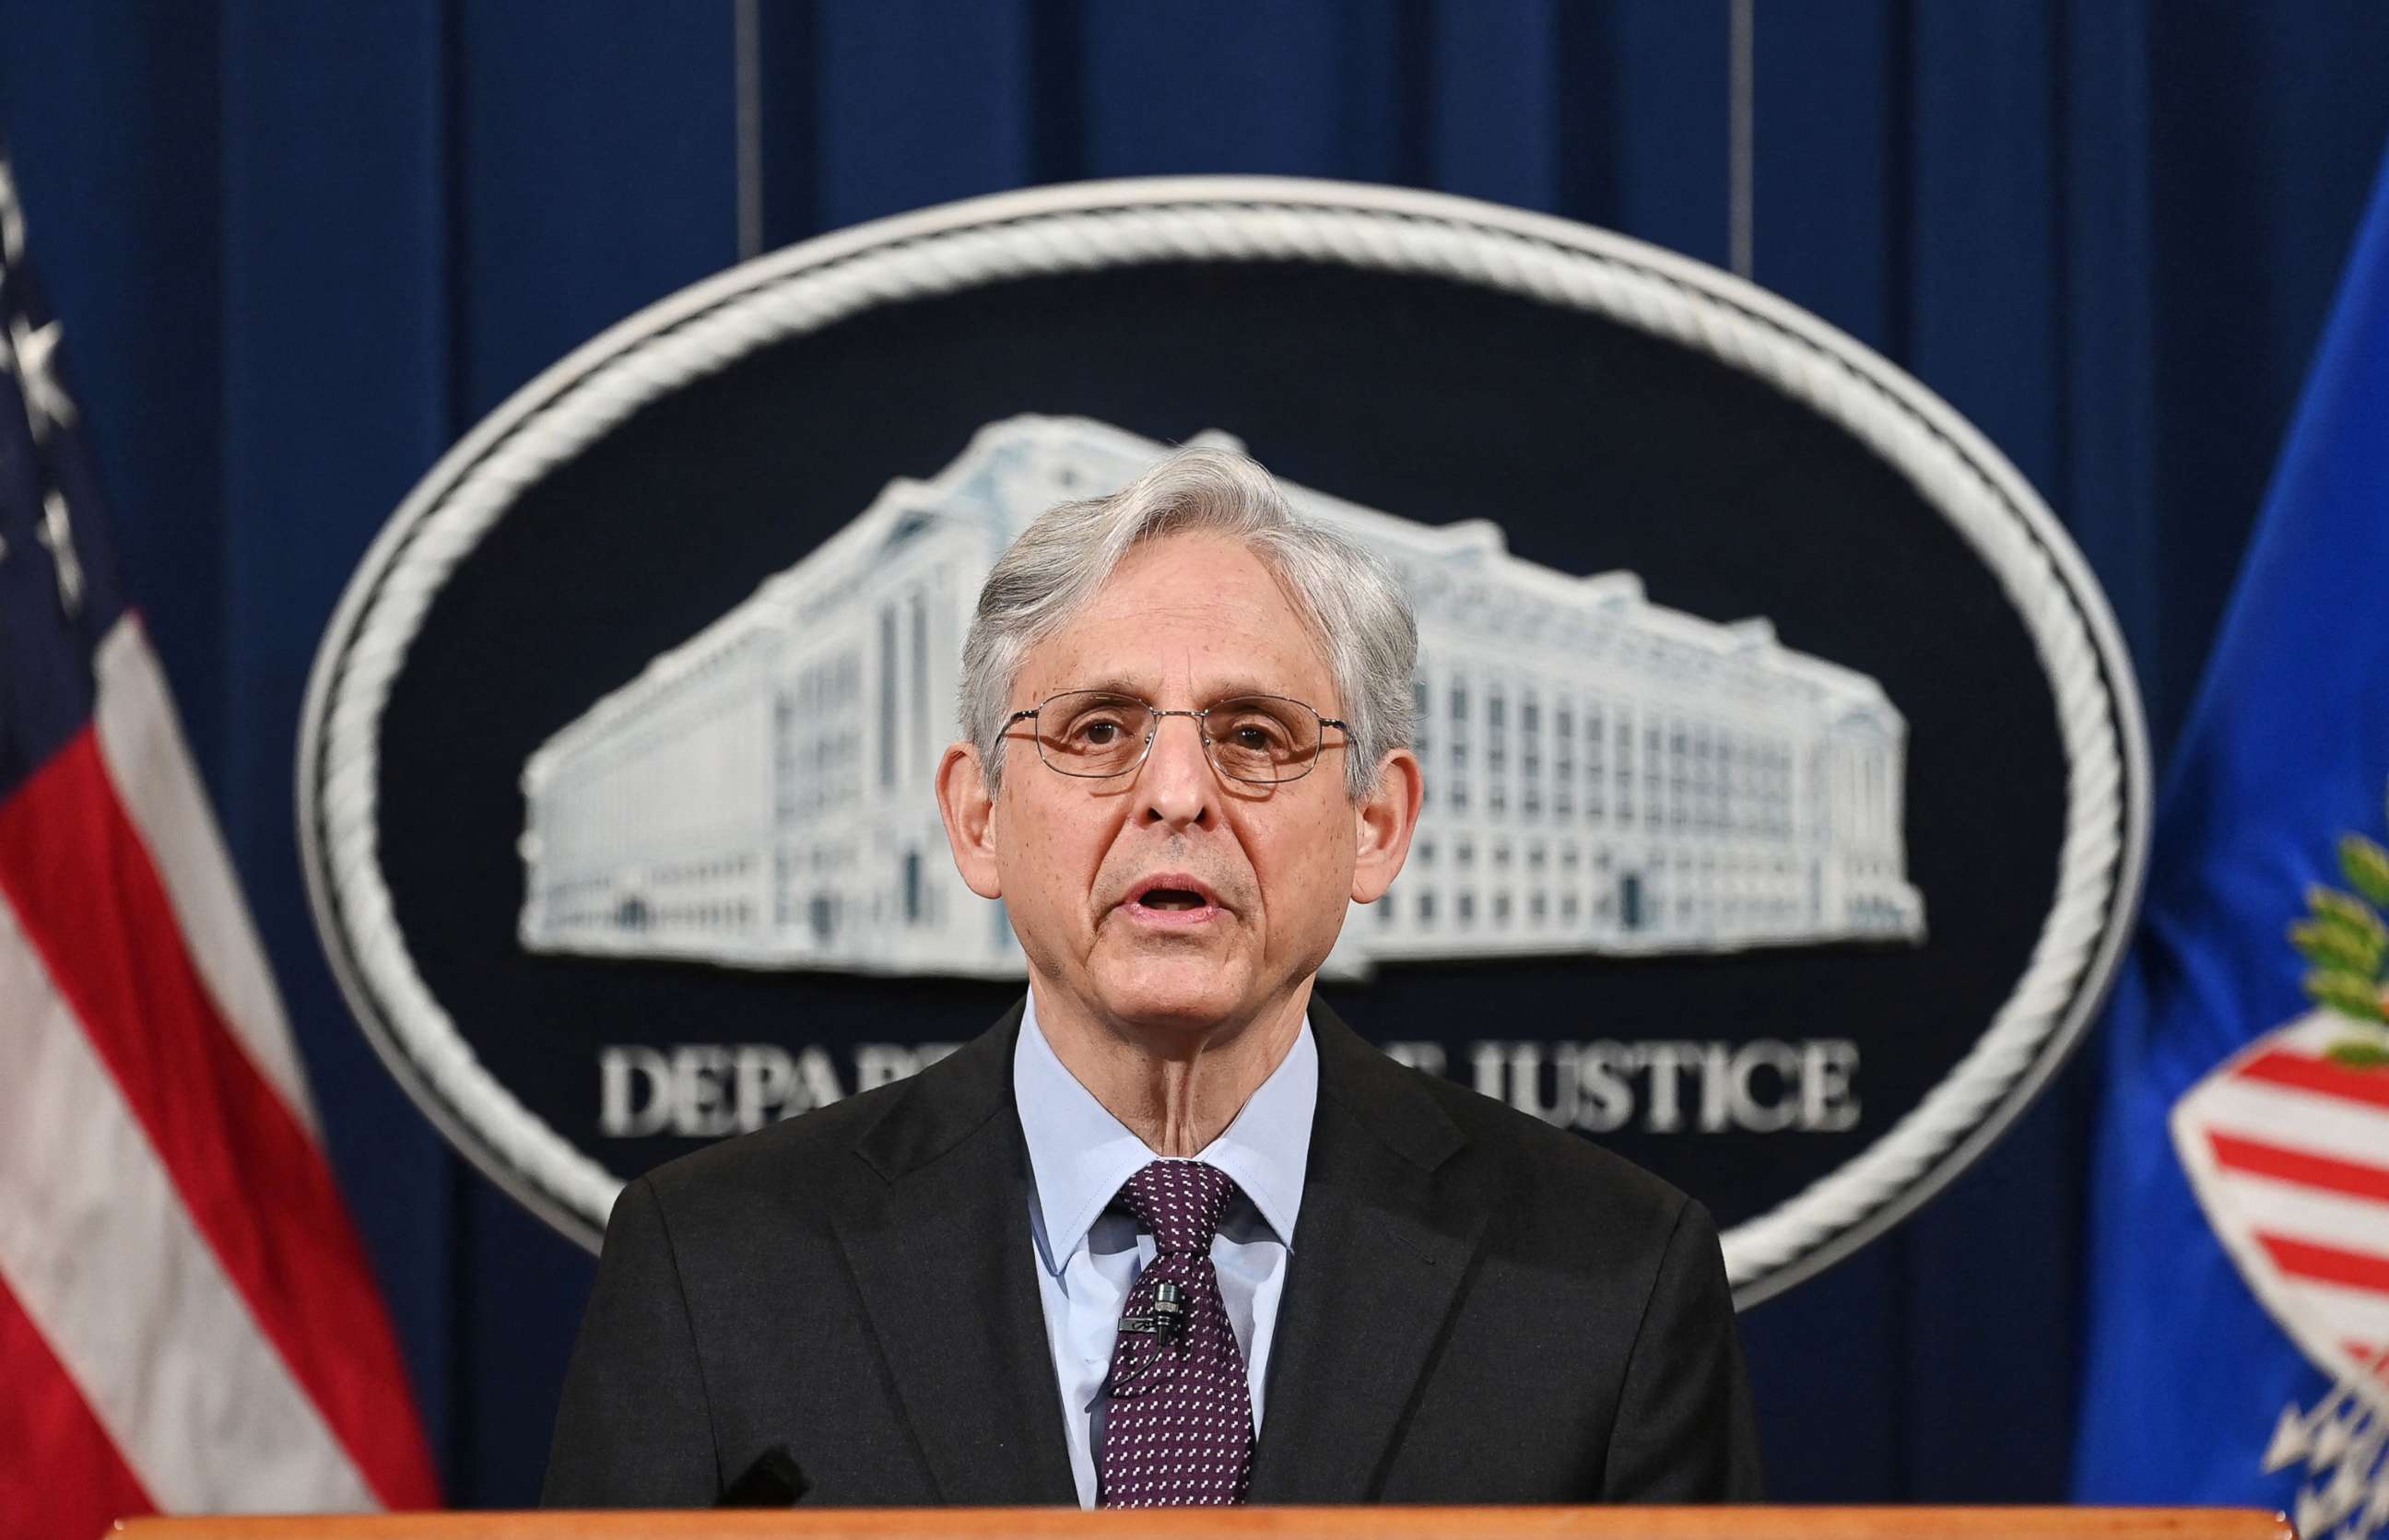 PHOTO: US Attorney General Merrick Garland speaks at the Department of Justice in Washington, D.C on April 26, 2021.